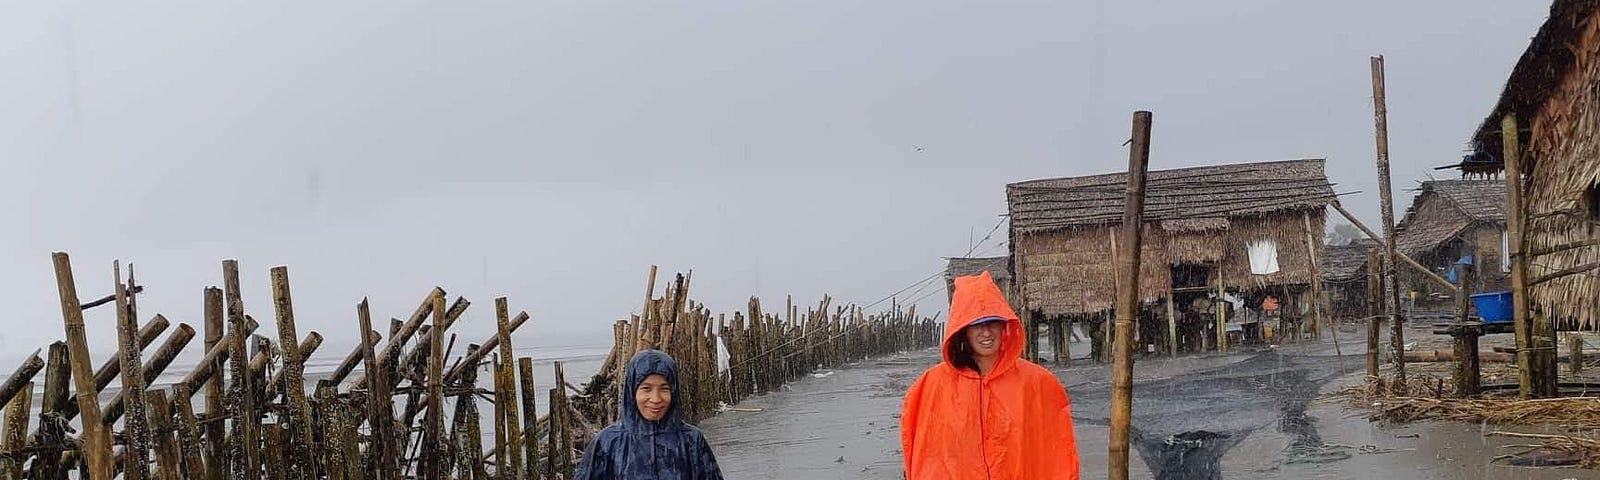 Two intrepid researchers walking through a small fishing village, with thatch huts and wooden fencing, in a torrential downpour.